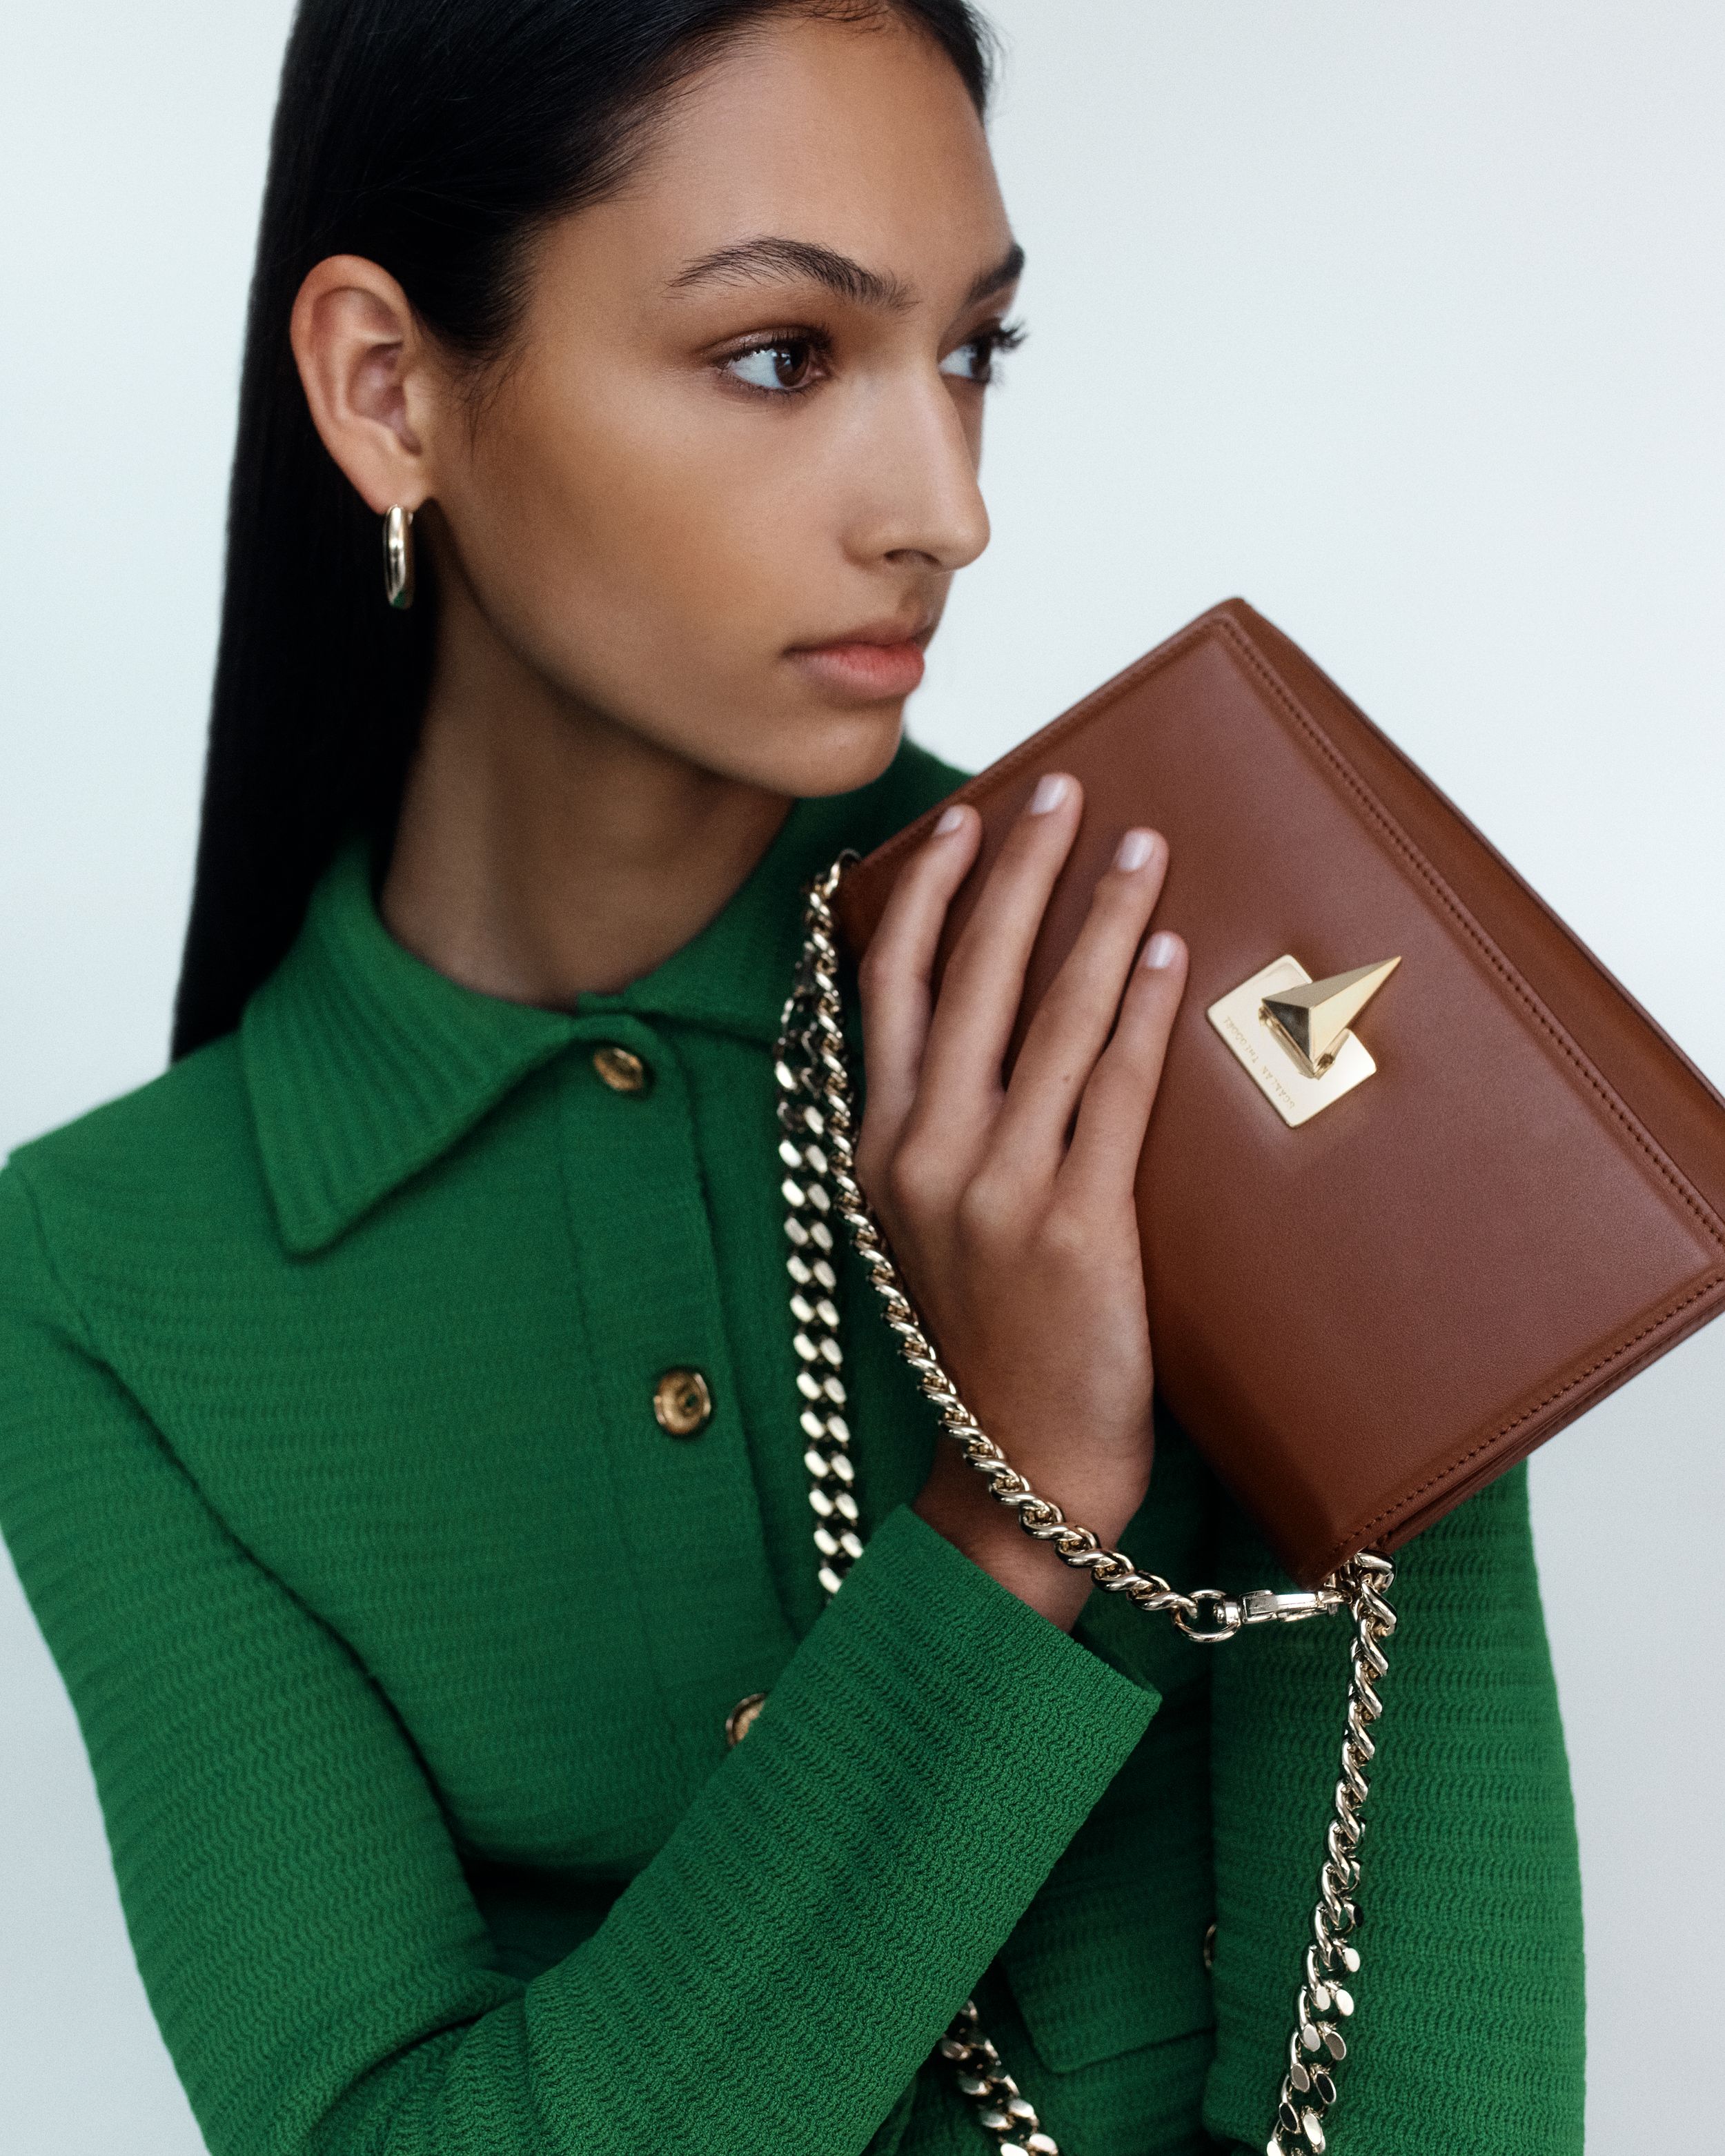 Model looking to the side holding up a brown leather bag with gold hardware, wearing a green collared jacket